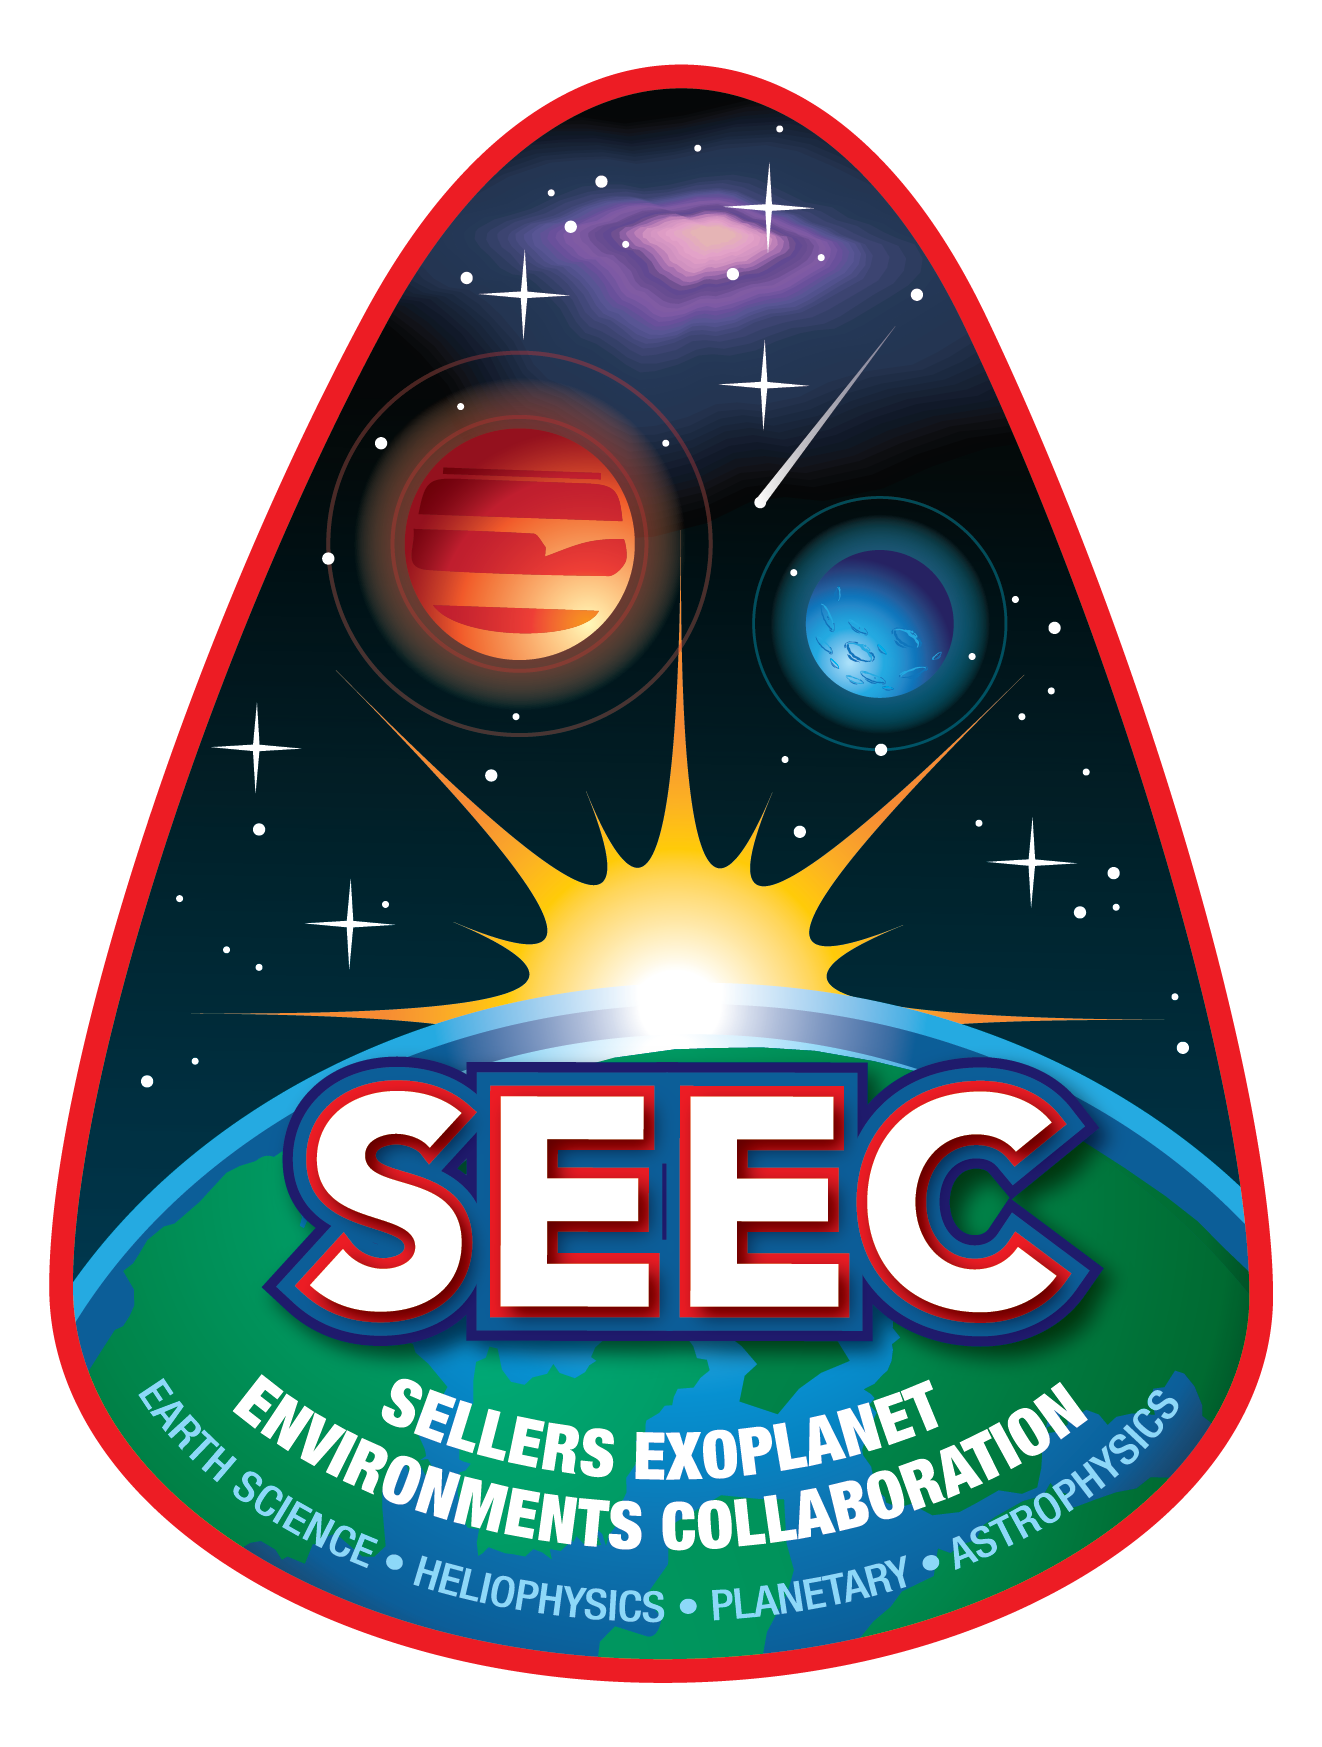 Sellers Exoplanet Environment Collaboration logo